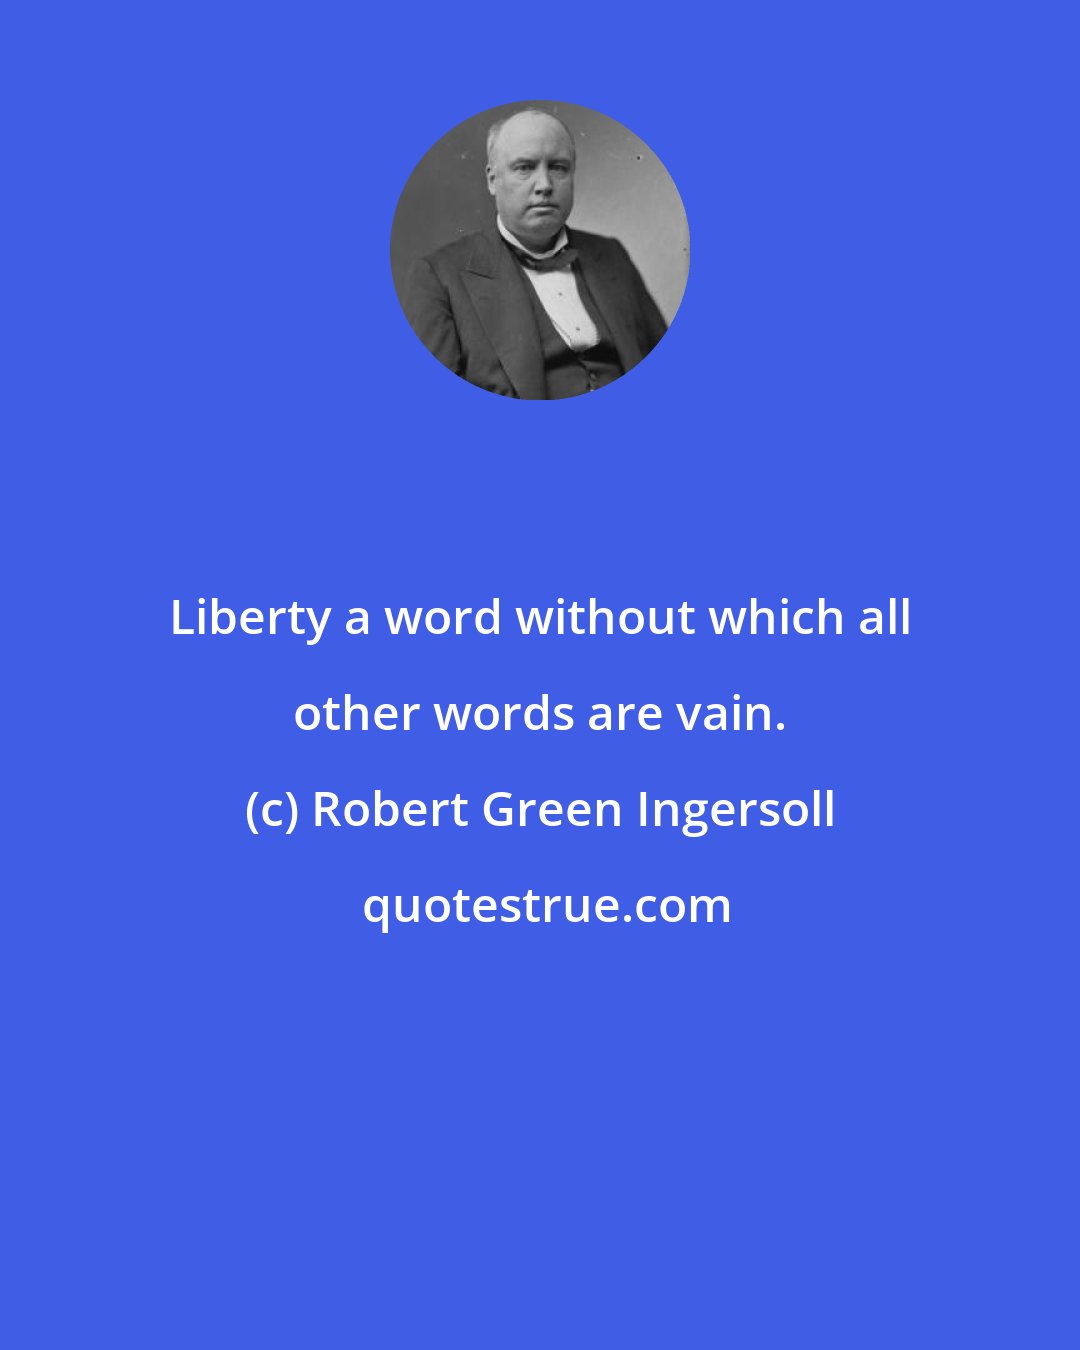 Robert Green Ingersoll: Liberty a word without which all other words are vain.